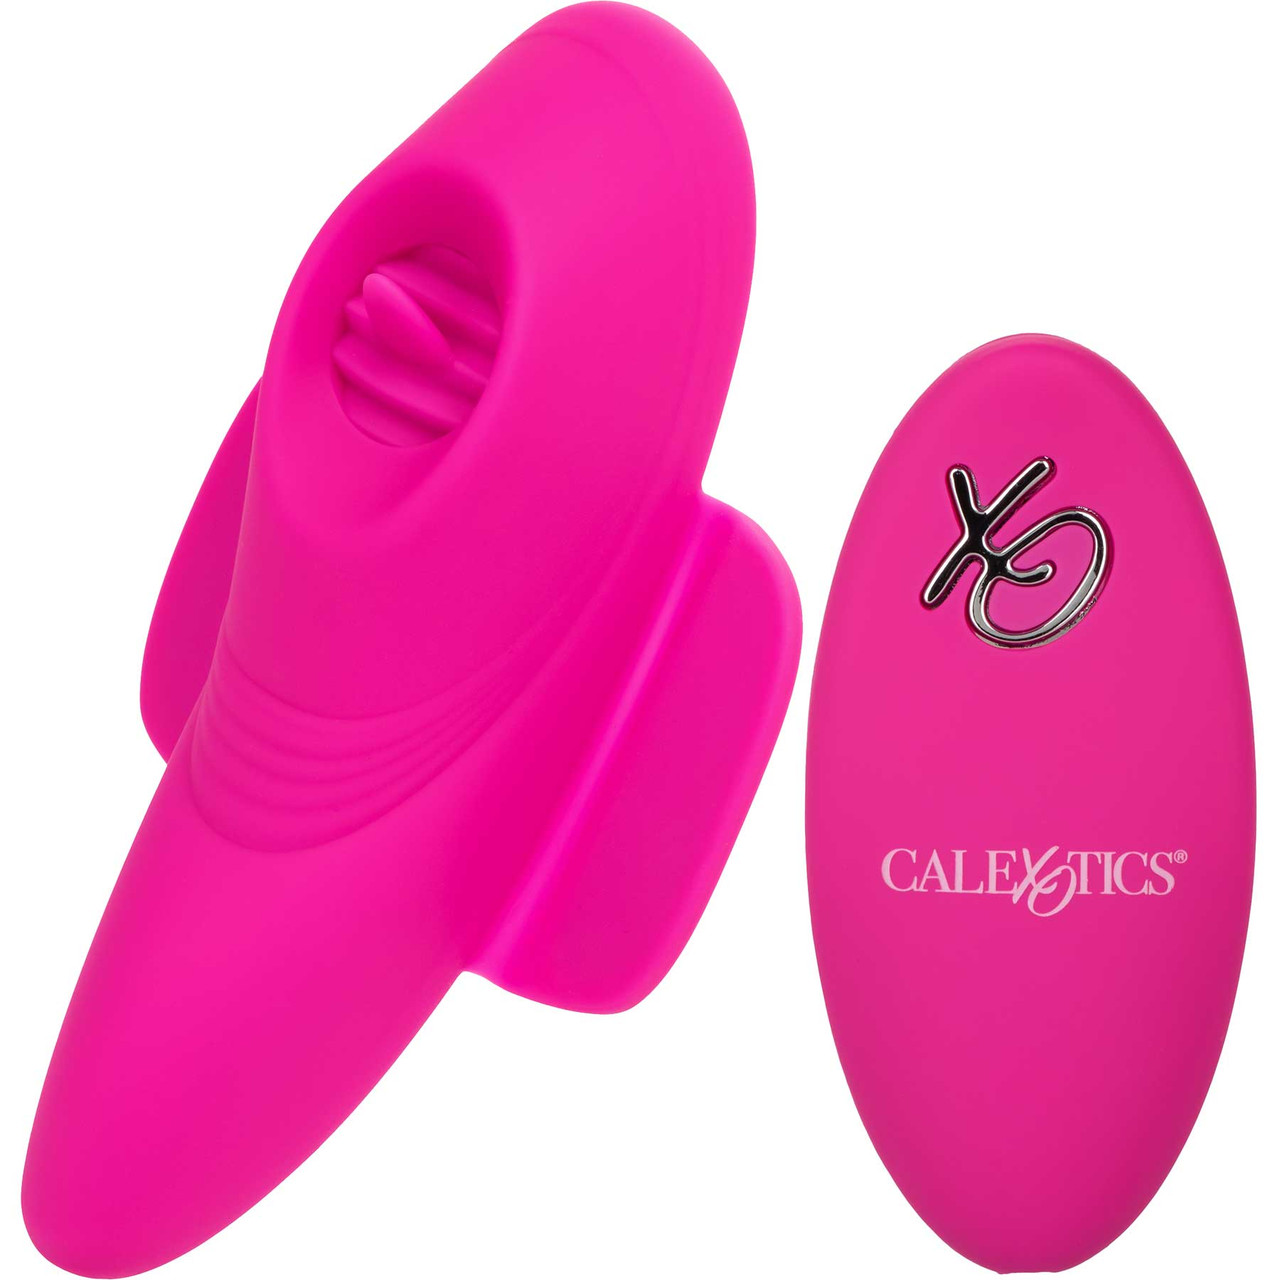 Lock-N-Play Remote Flicker Rechargeable Silicone Panty Teaser With